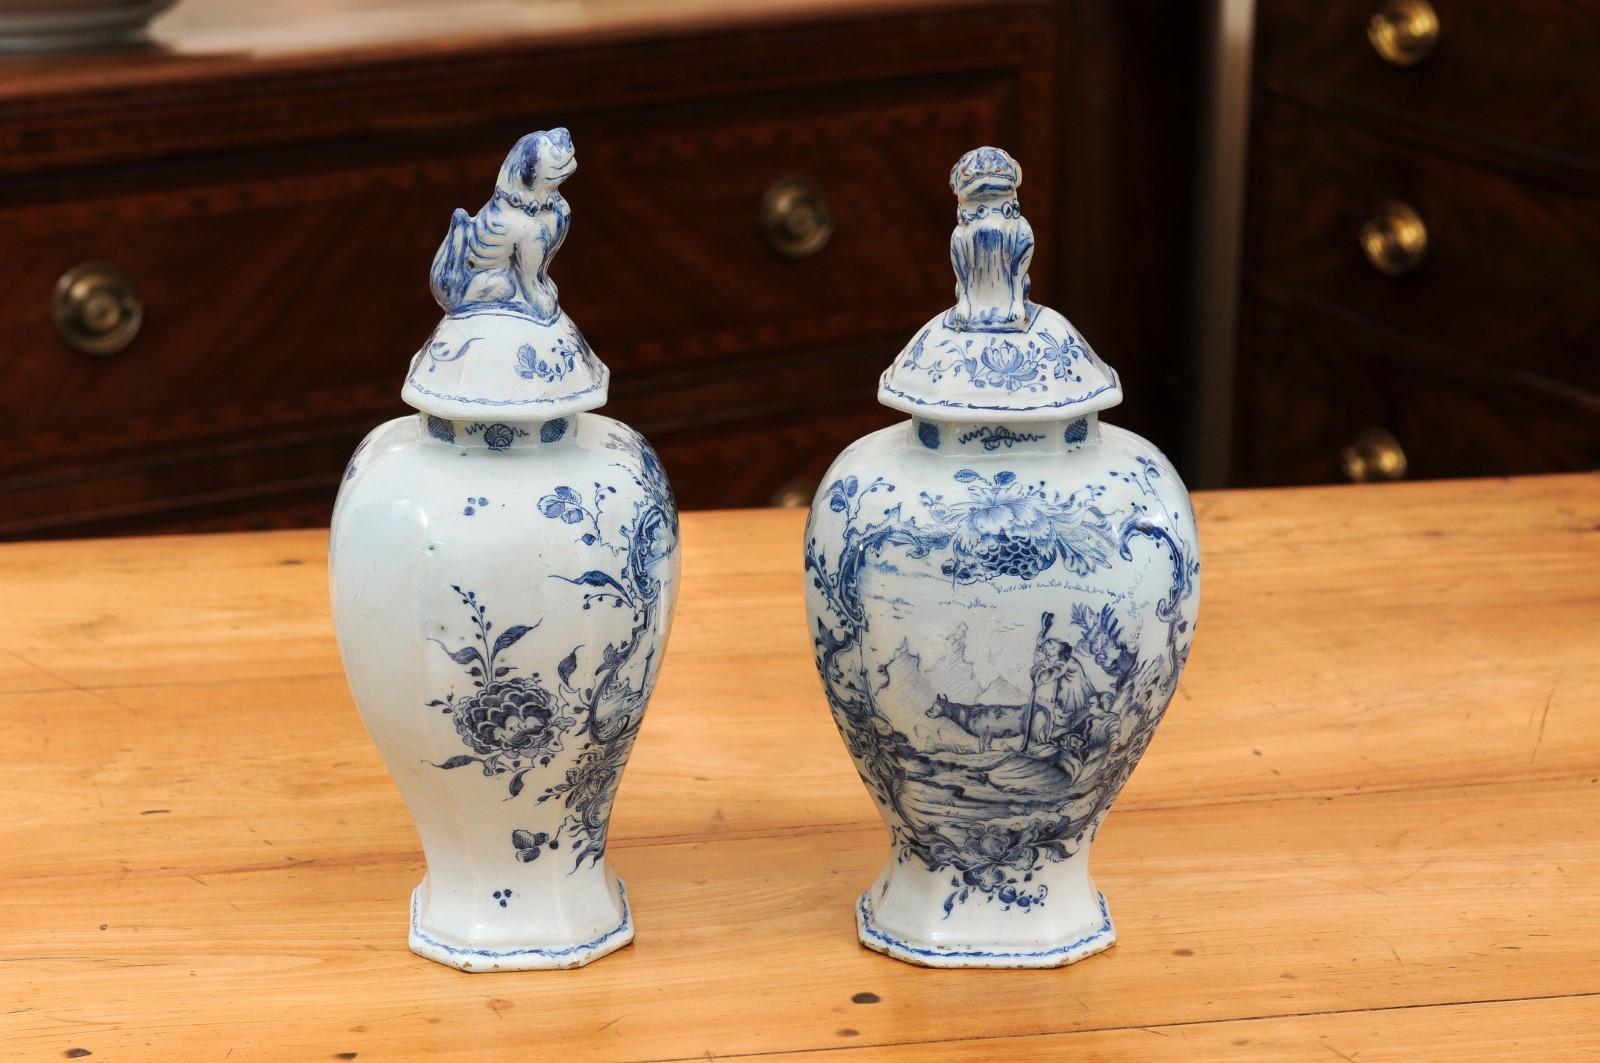 Pair of Late 18th Century Italian Porcelain Garniture Urns with Lids For Sale 6